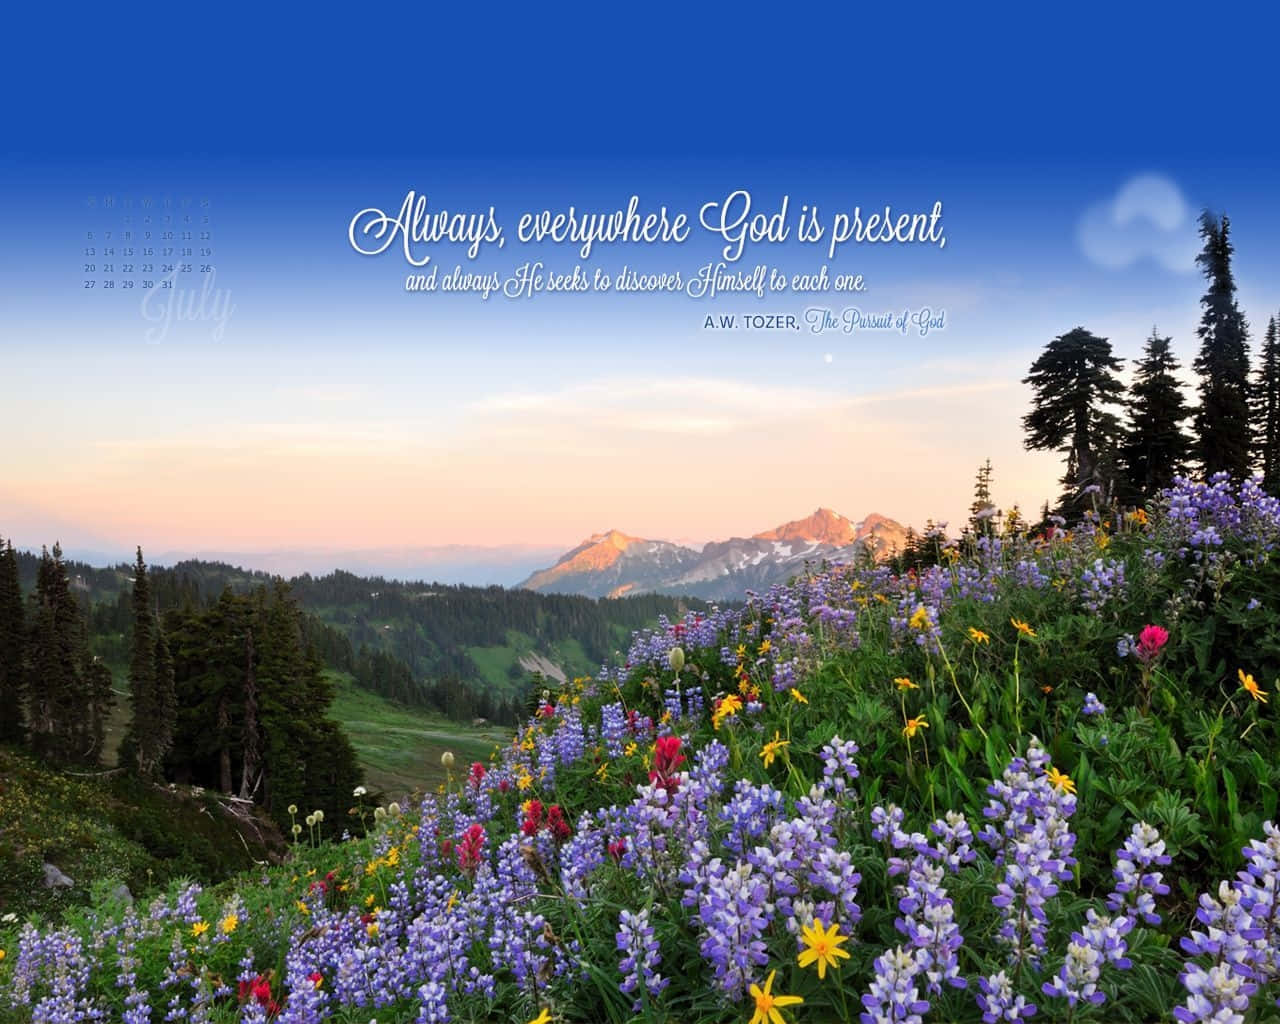 Crosscards Computer Spring Flowers Bible Quote Wallpaper